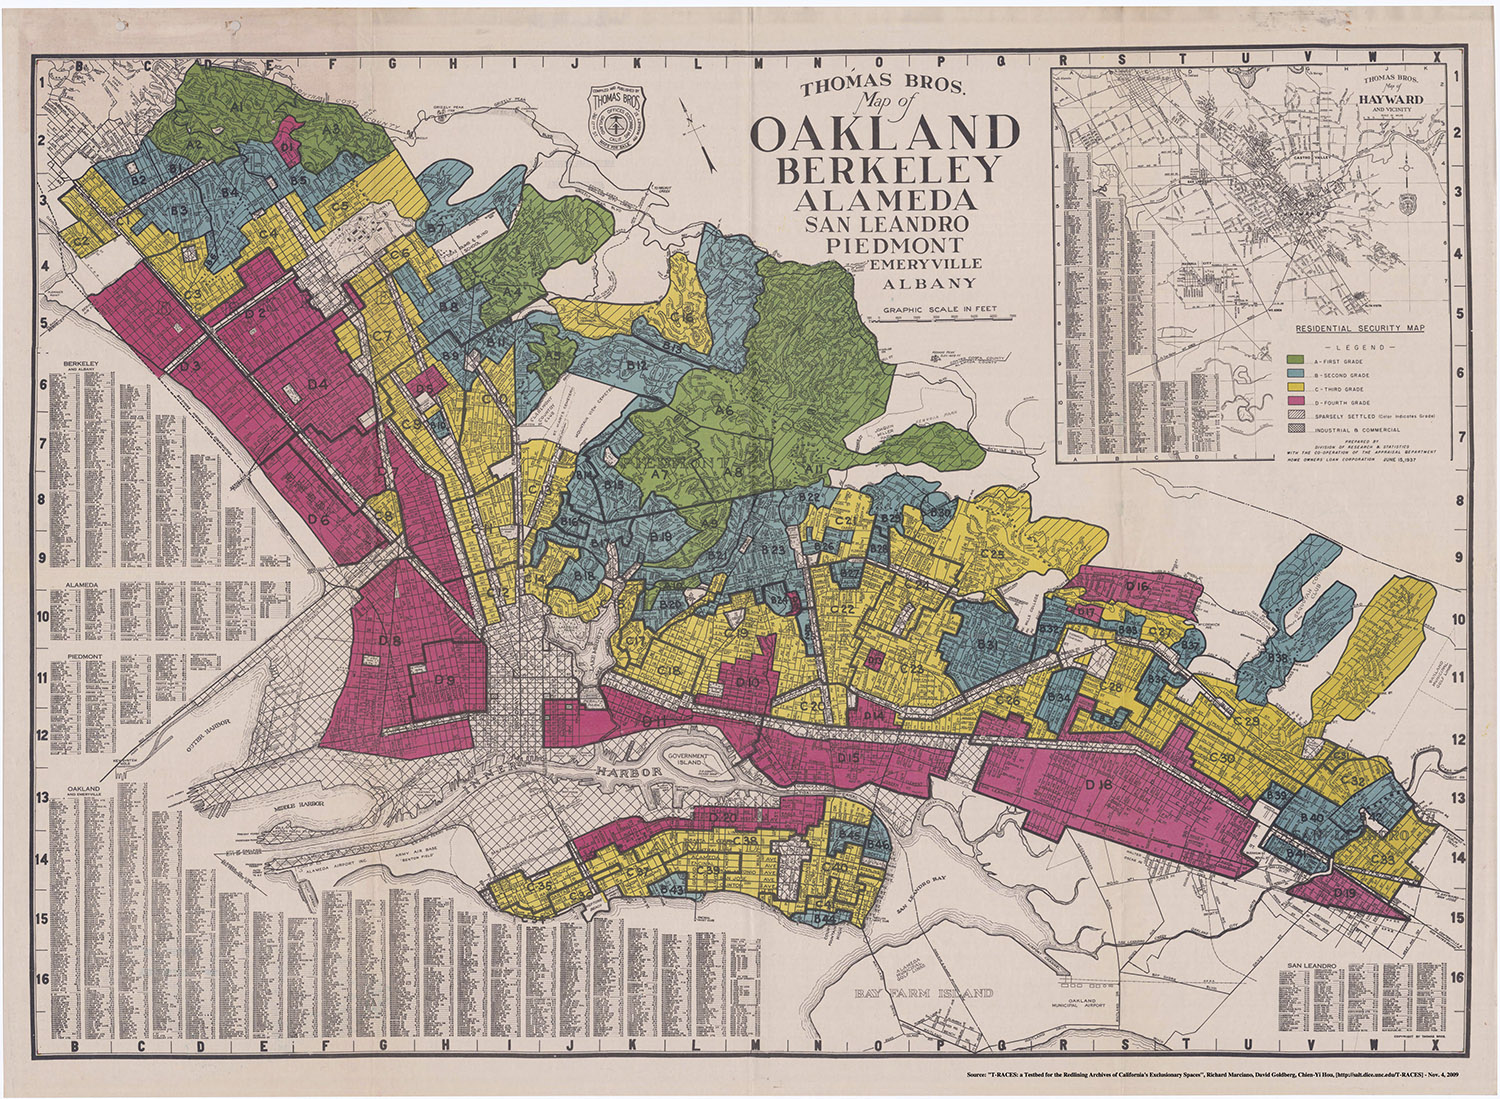 Multi-colored map of Oakland, California depicting redlining 